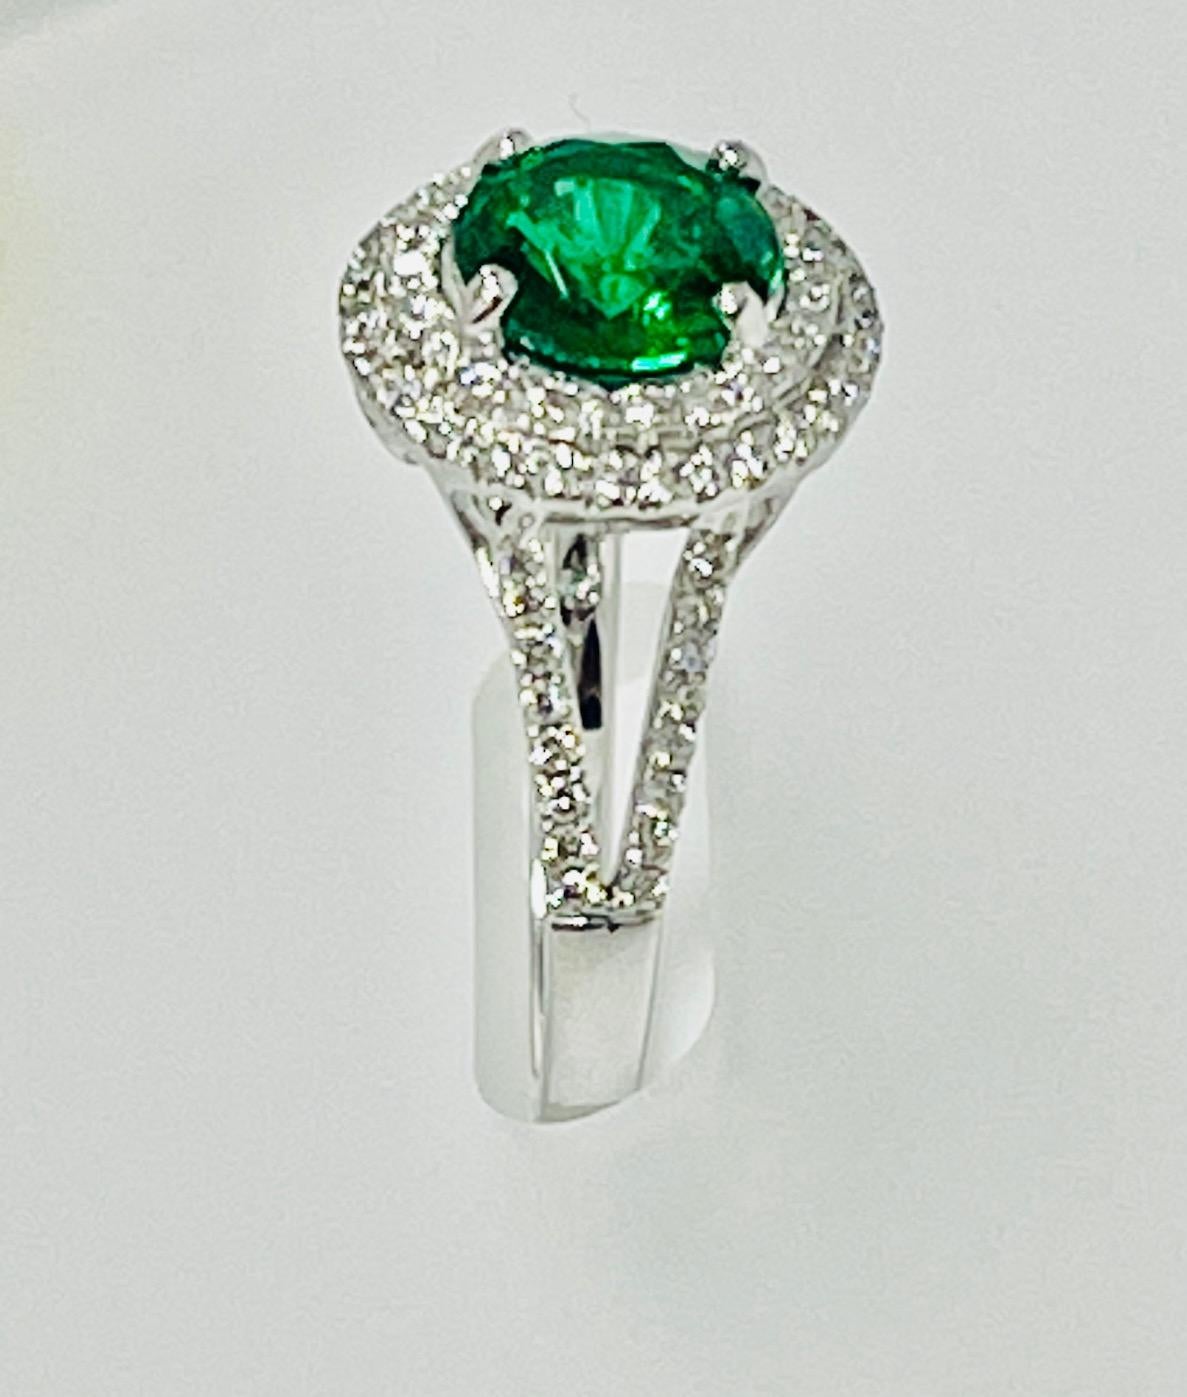 Round Cut 1.25 Carat Zambian Emerald Diamond Cocktail Ring For Sale